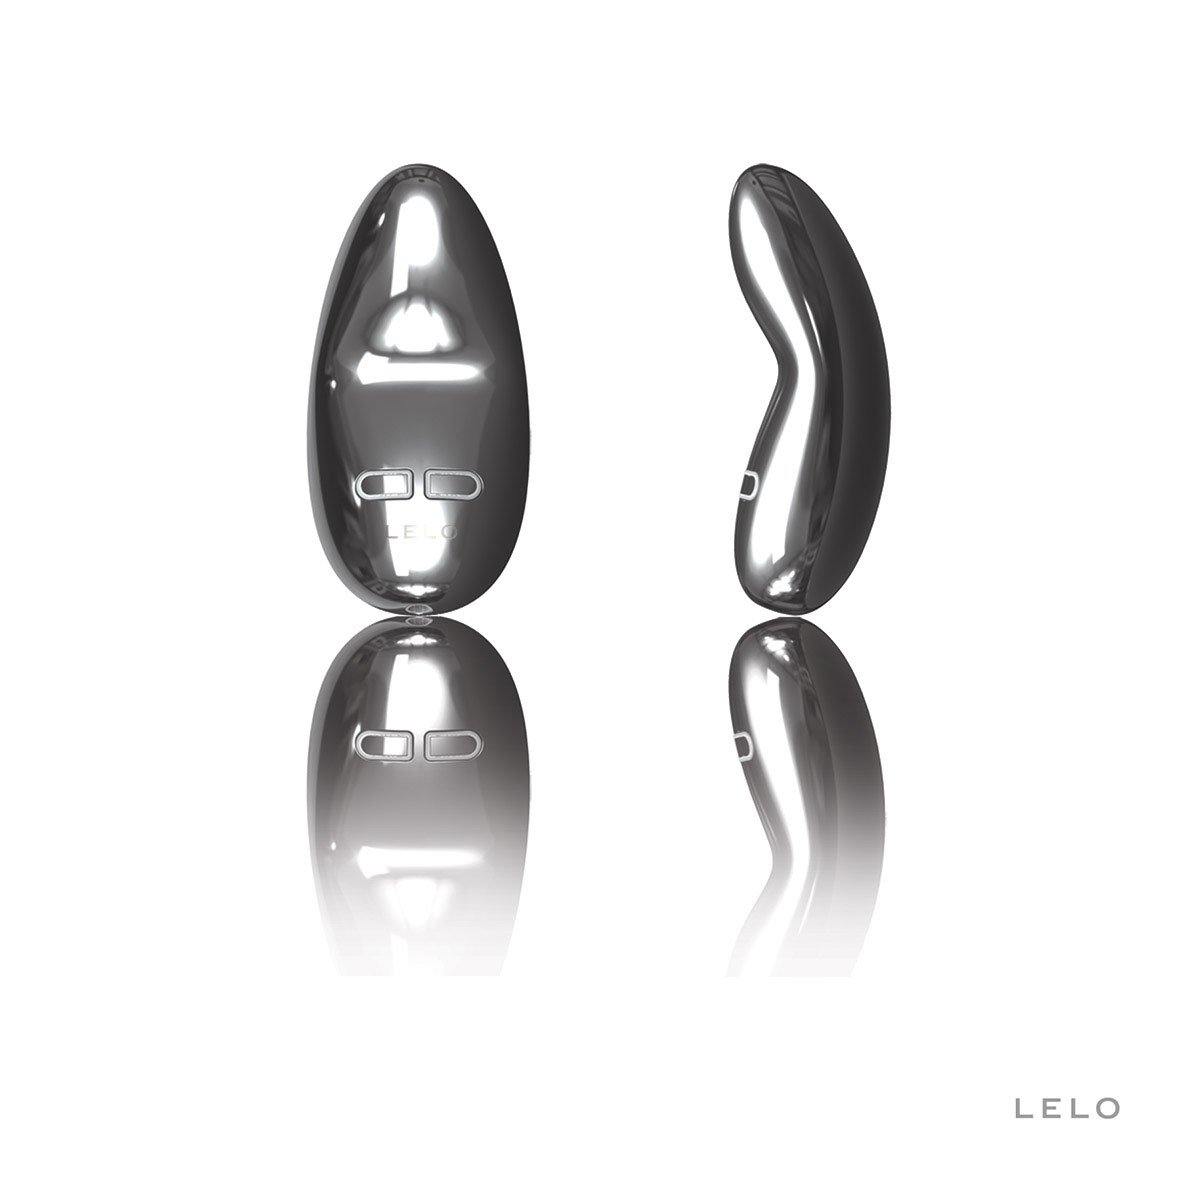 Lelo Yva Stainless Steel - Buy At Luxury Toy X - Free 3-Day Shipping